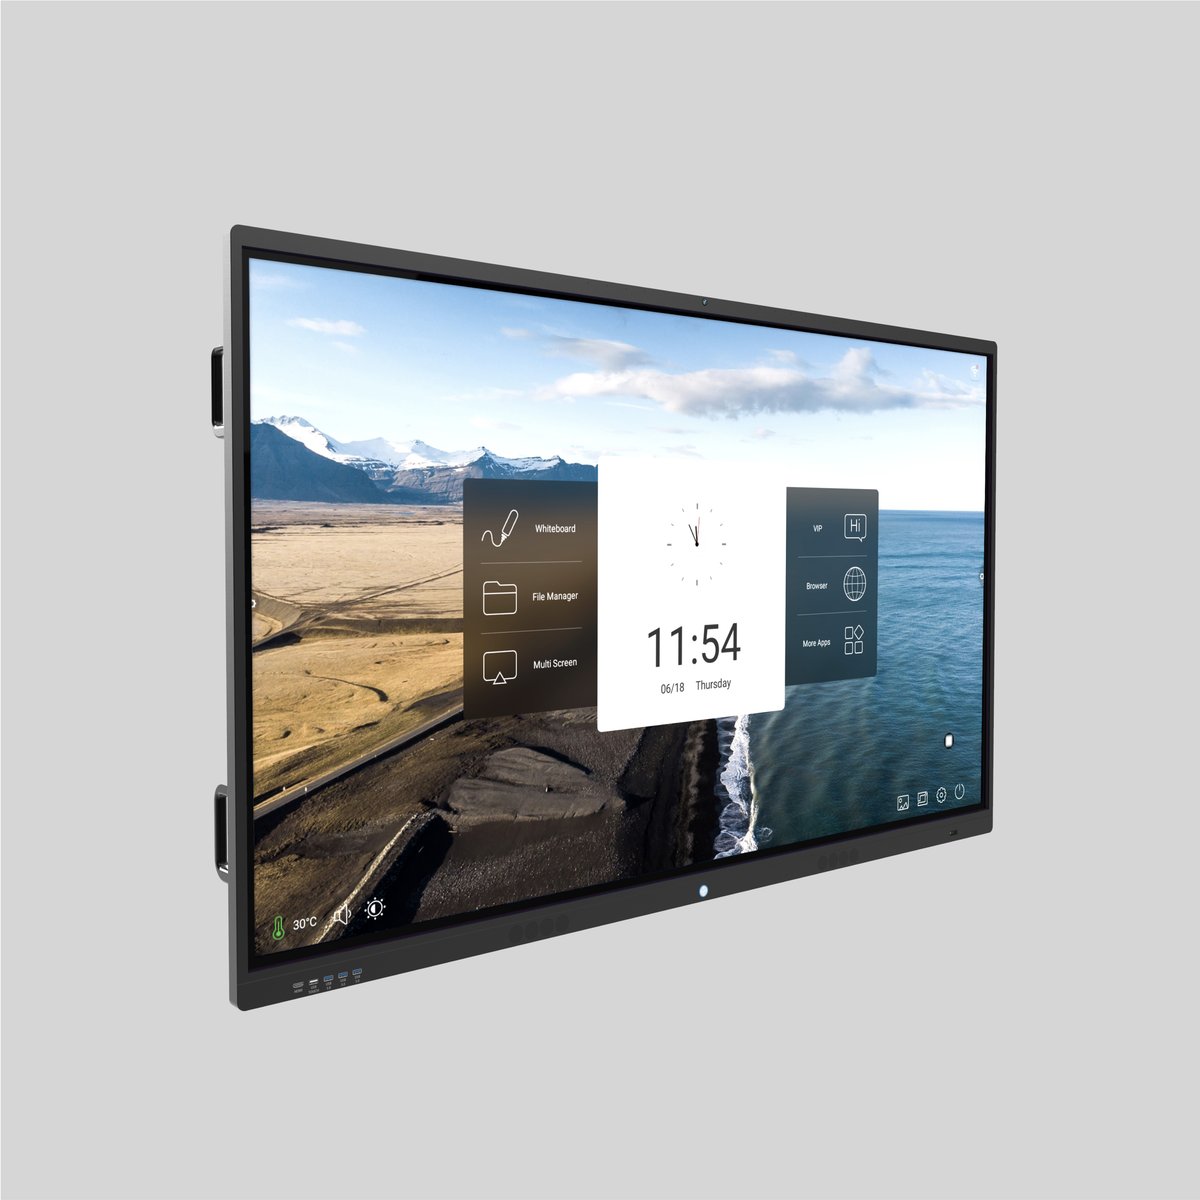 Bestboard All-in-One Smart Display R5G